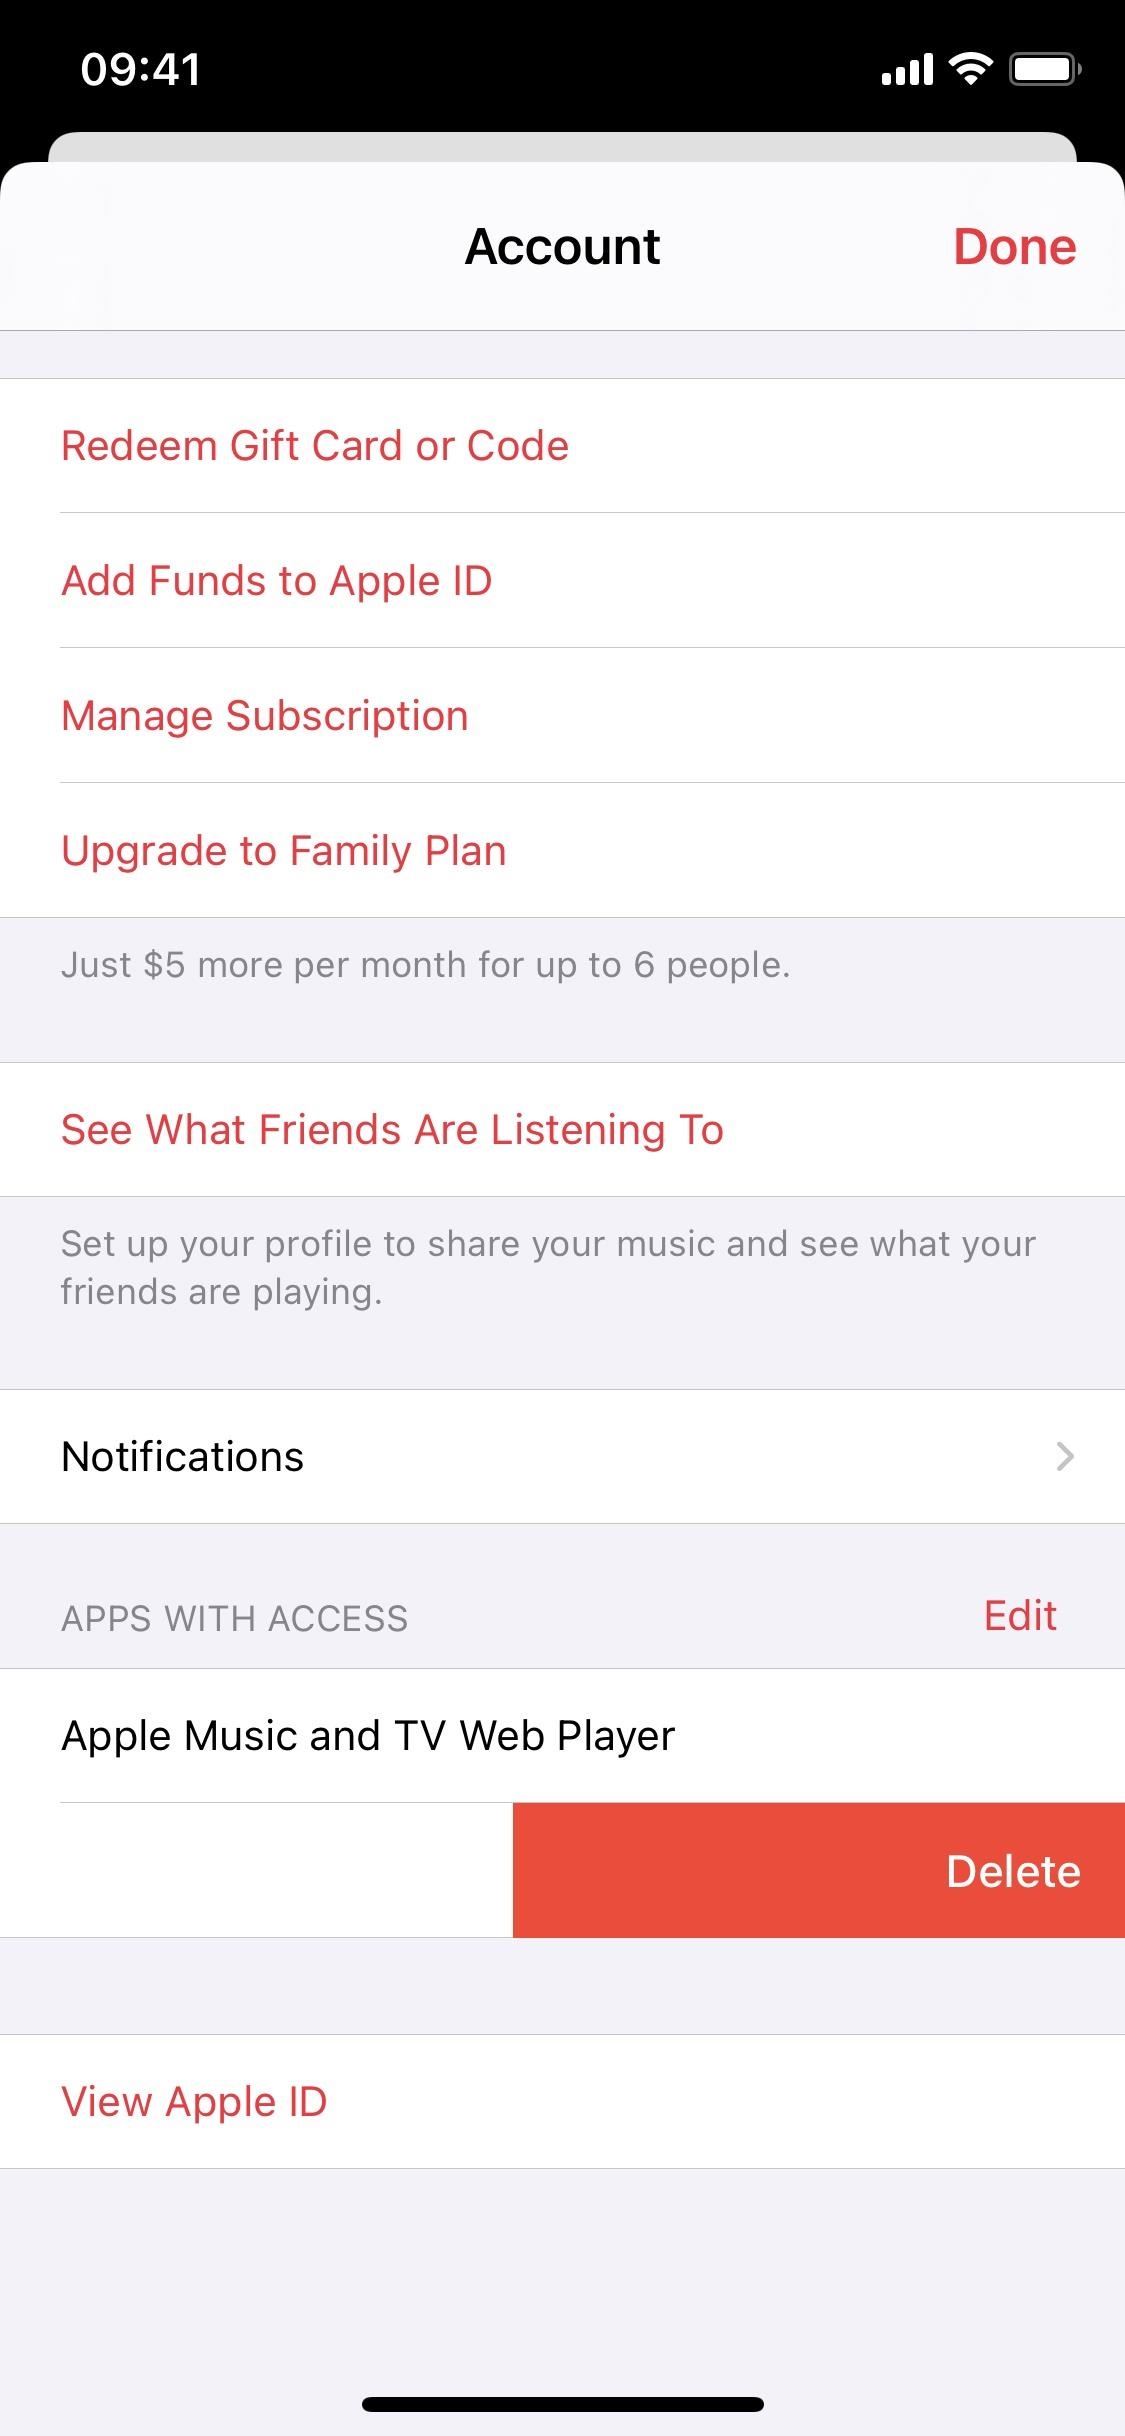 Apps & Services May Have Access to Your Apple Music & Media Library — Here's How to Check & Revoke Their Permissions